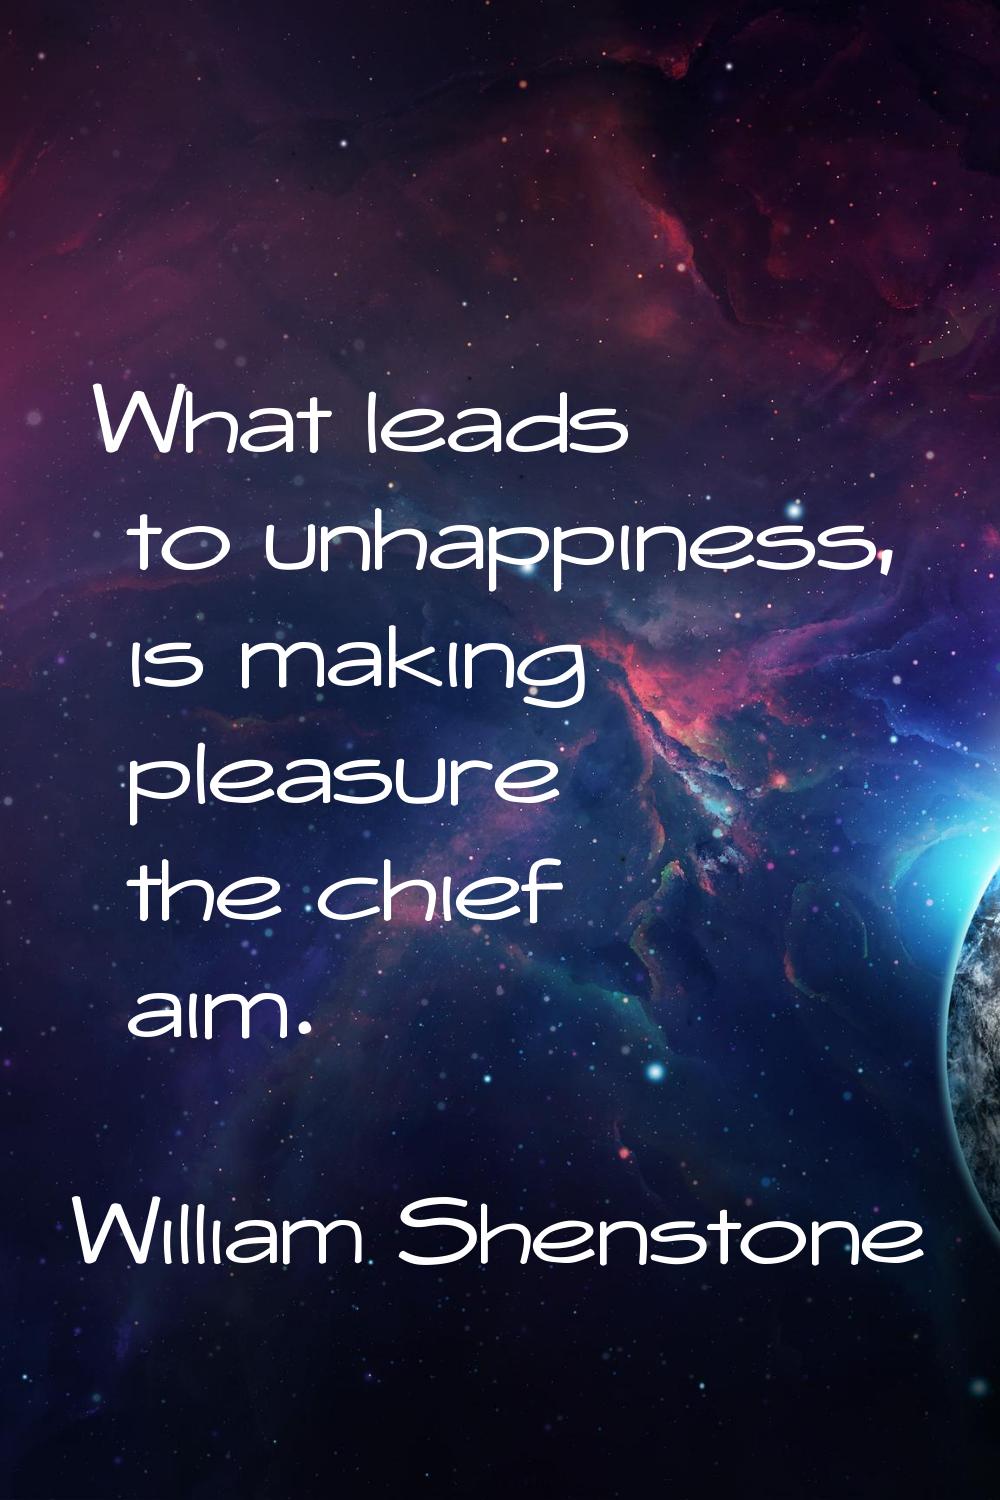 What leads to unhappiness, is making pleasure the chief aim.